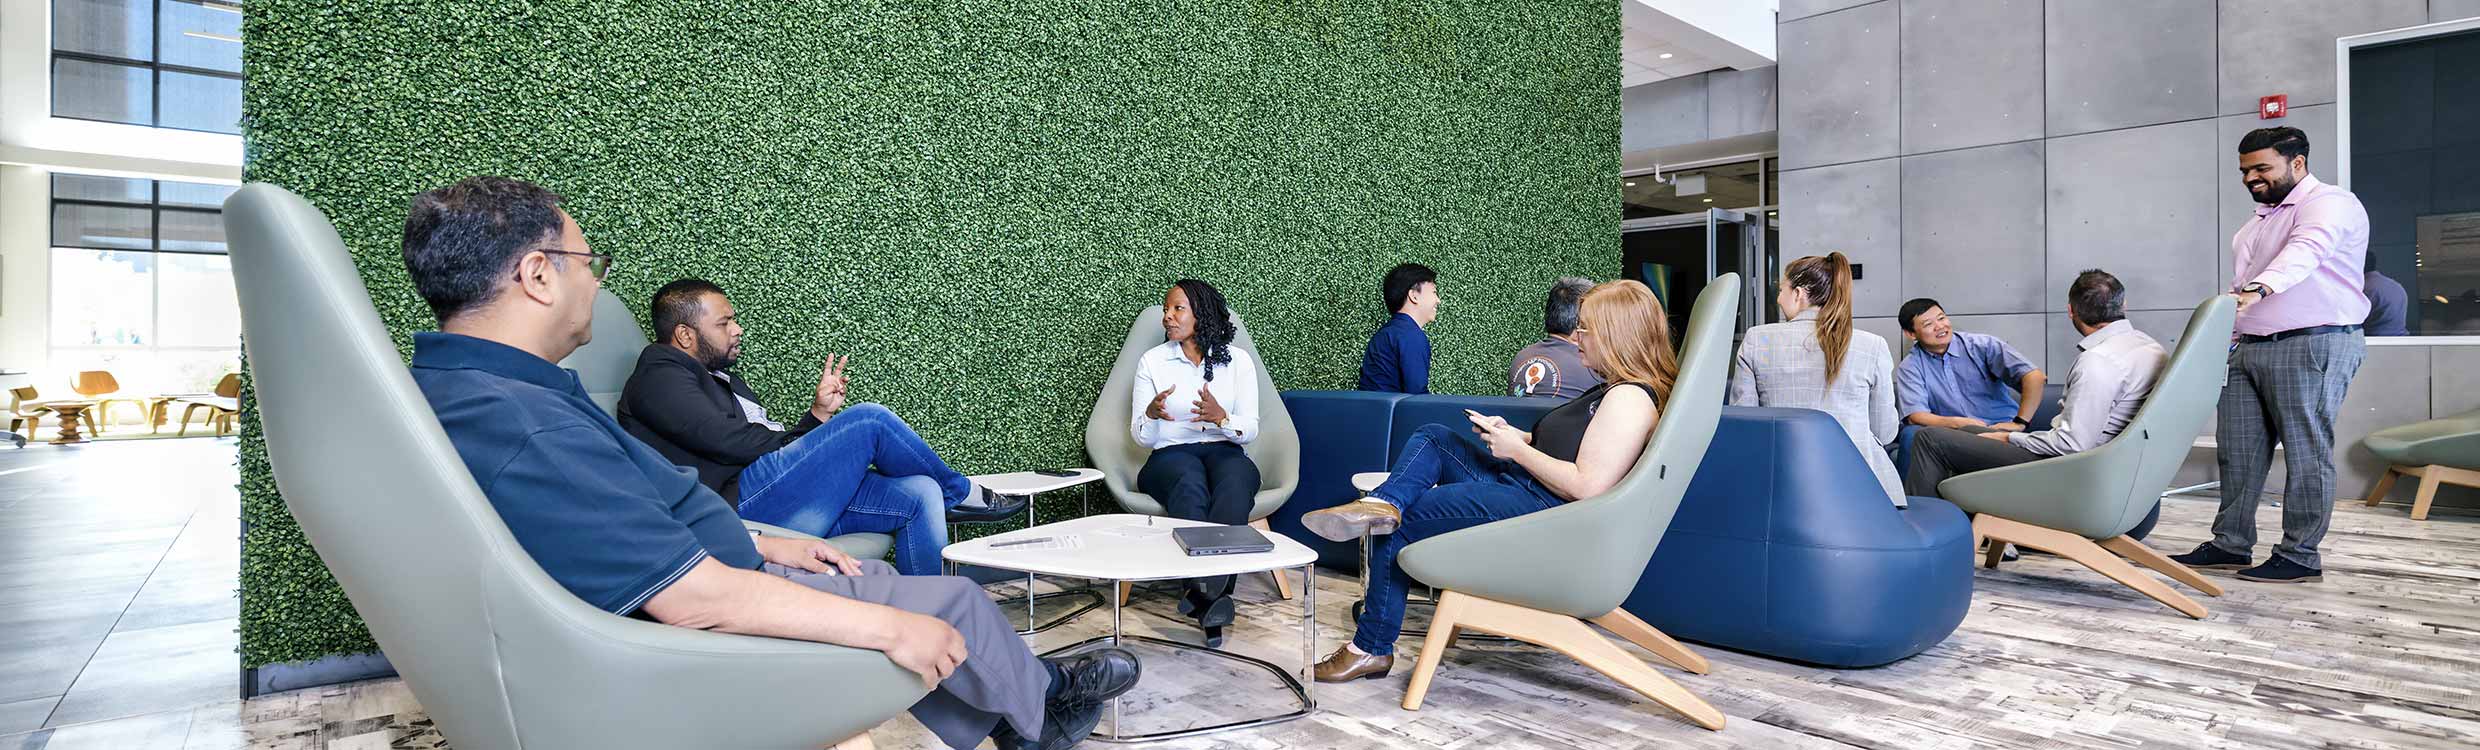 Employees sitting and talking in groups in a courtyard